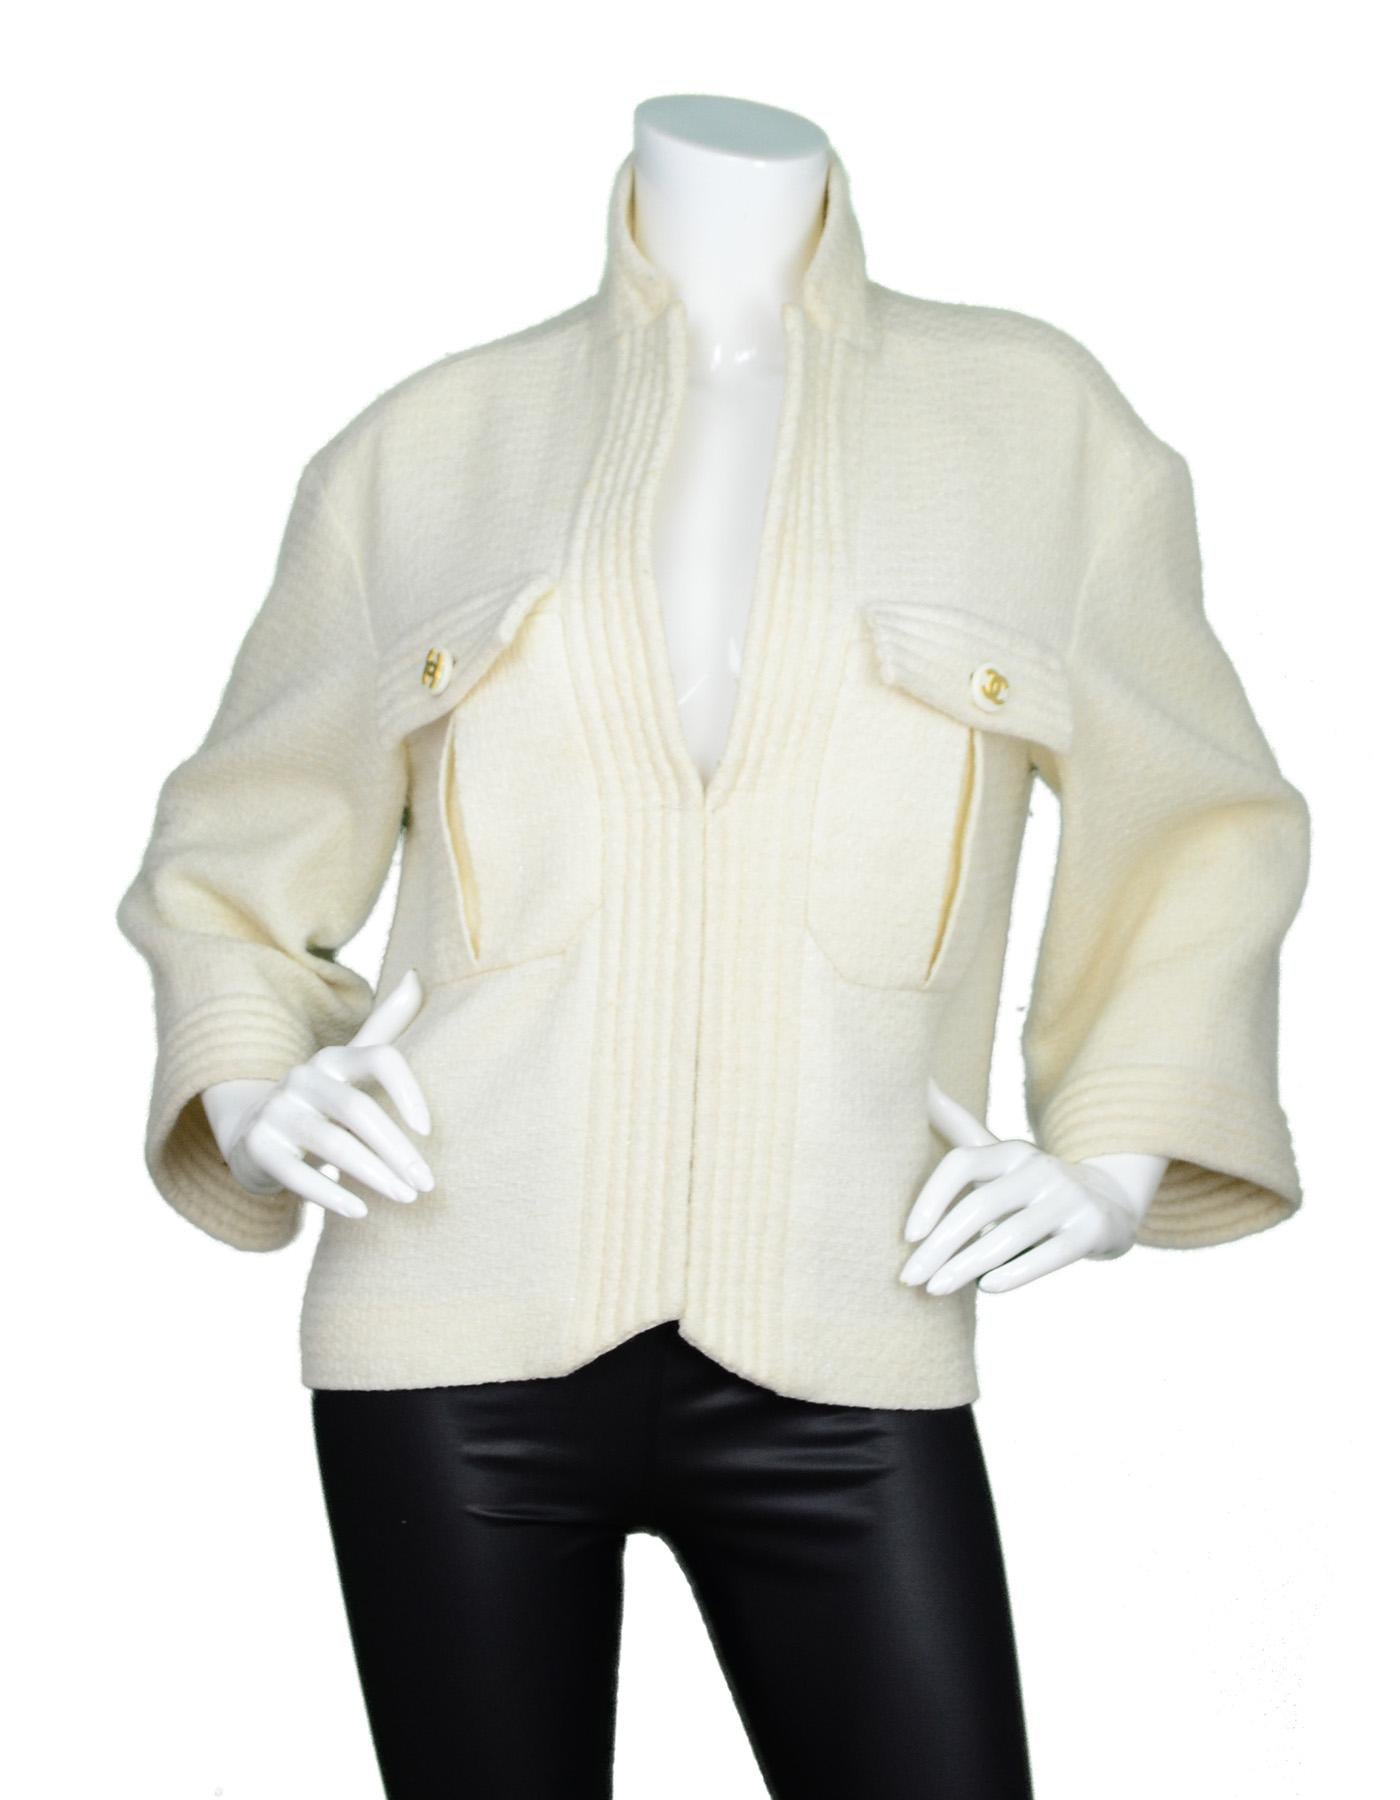 Chanel Cream Glitter Open Tweed Jacket W/ Ribbed Trim And CC Buttons Sz 42

Made In: France
Color: Cream and gold
Materials: 89% wool, 11% nylon
Lining: 100% silk
Opening/Closure: Open front
Overall Condition: Very good pre-owned condition with